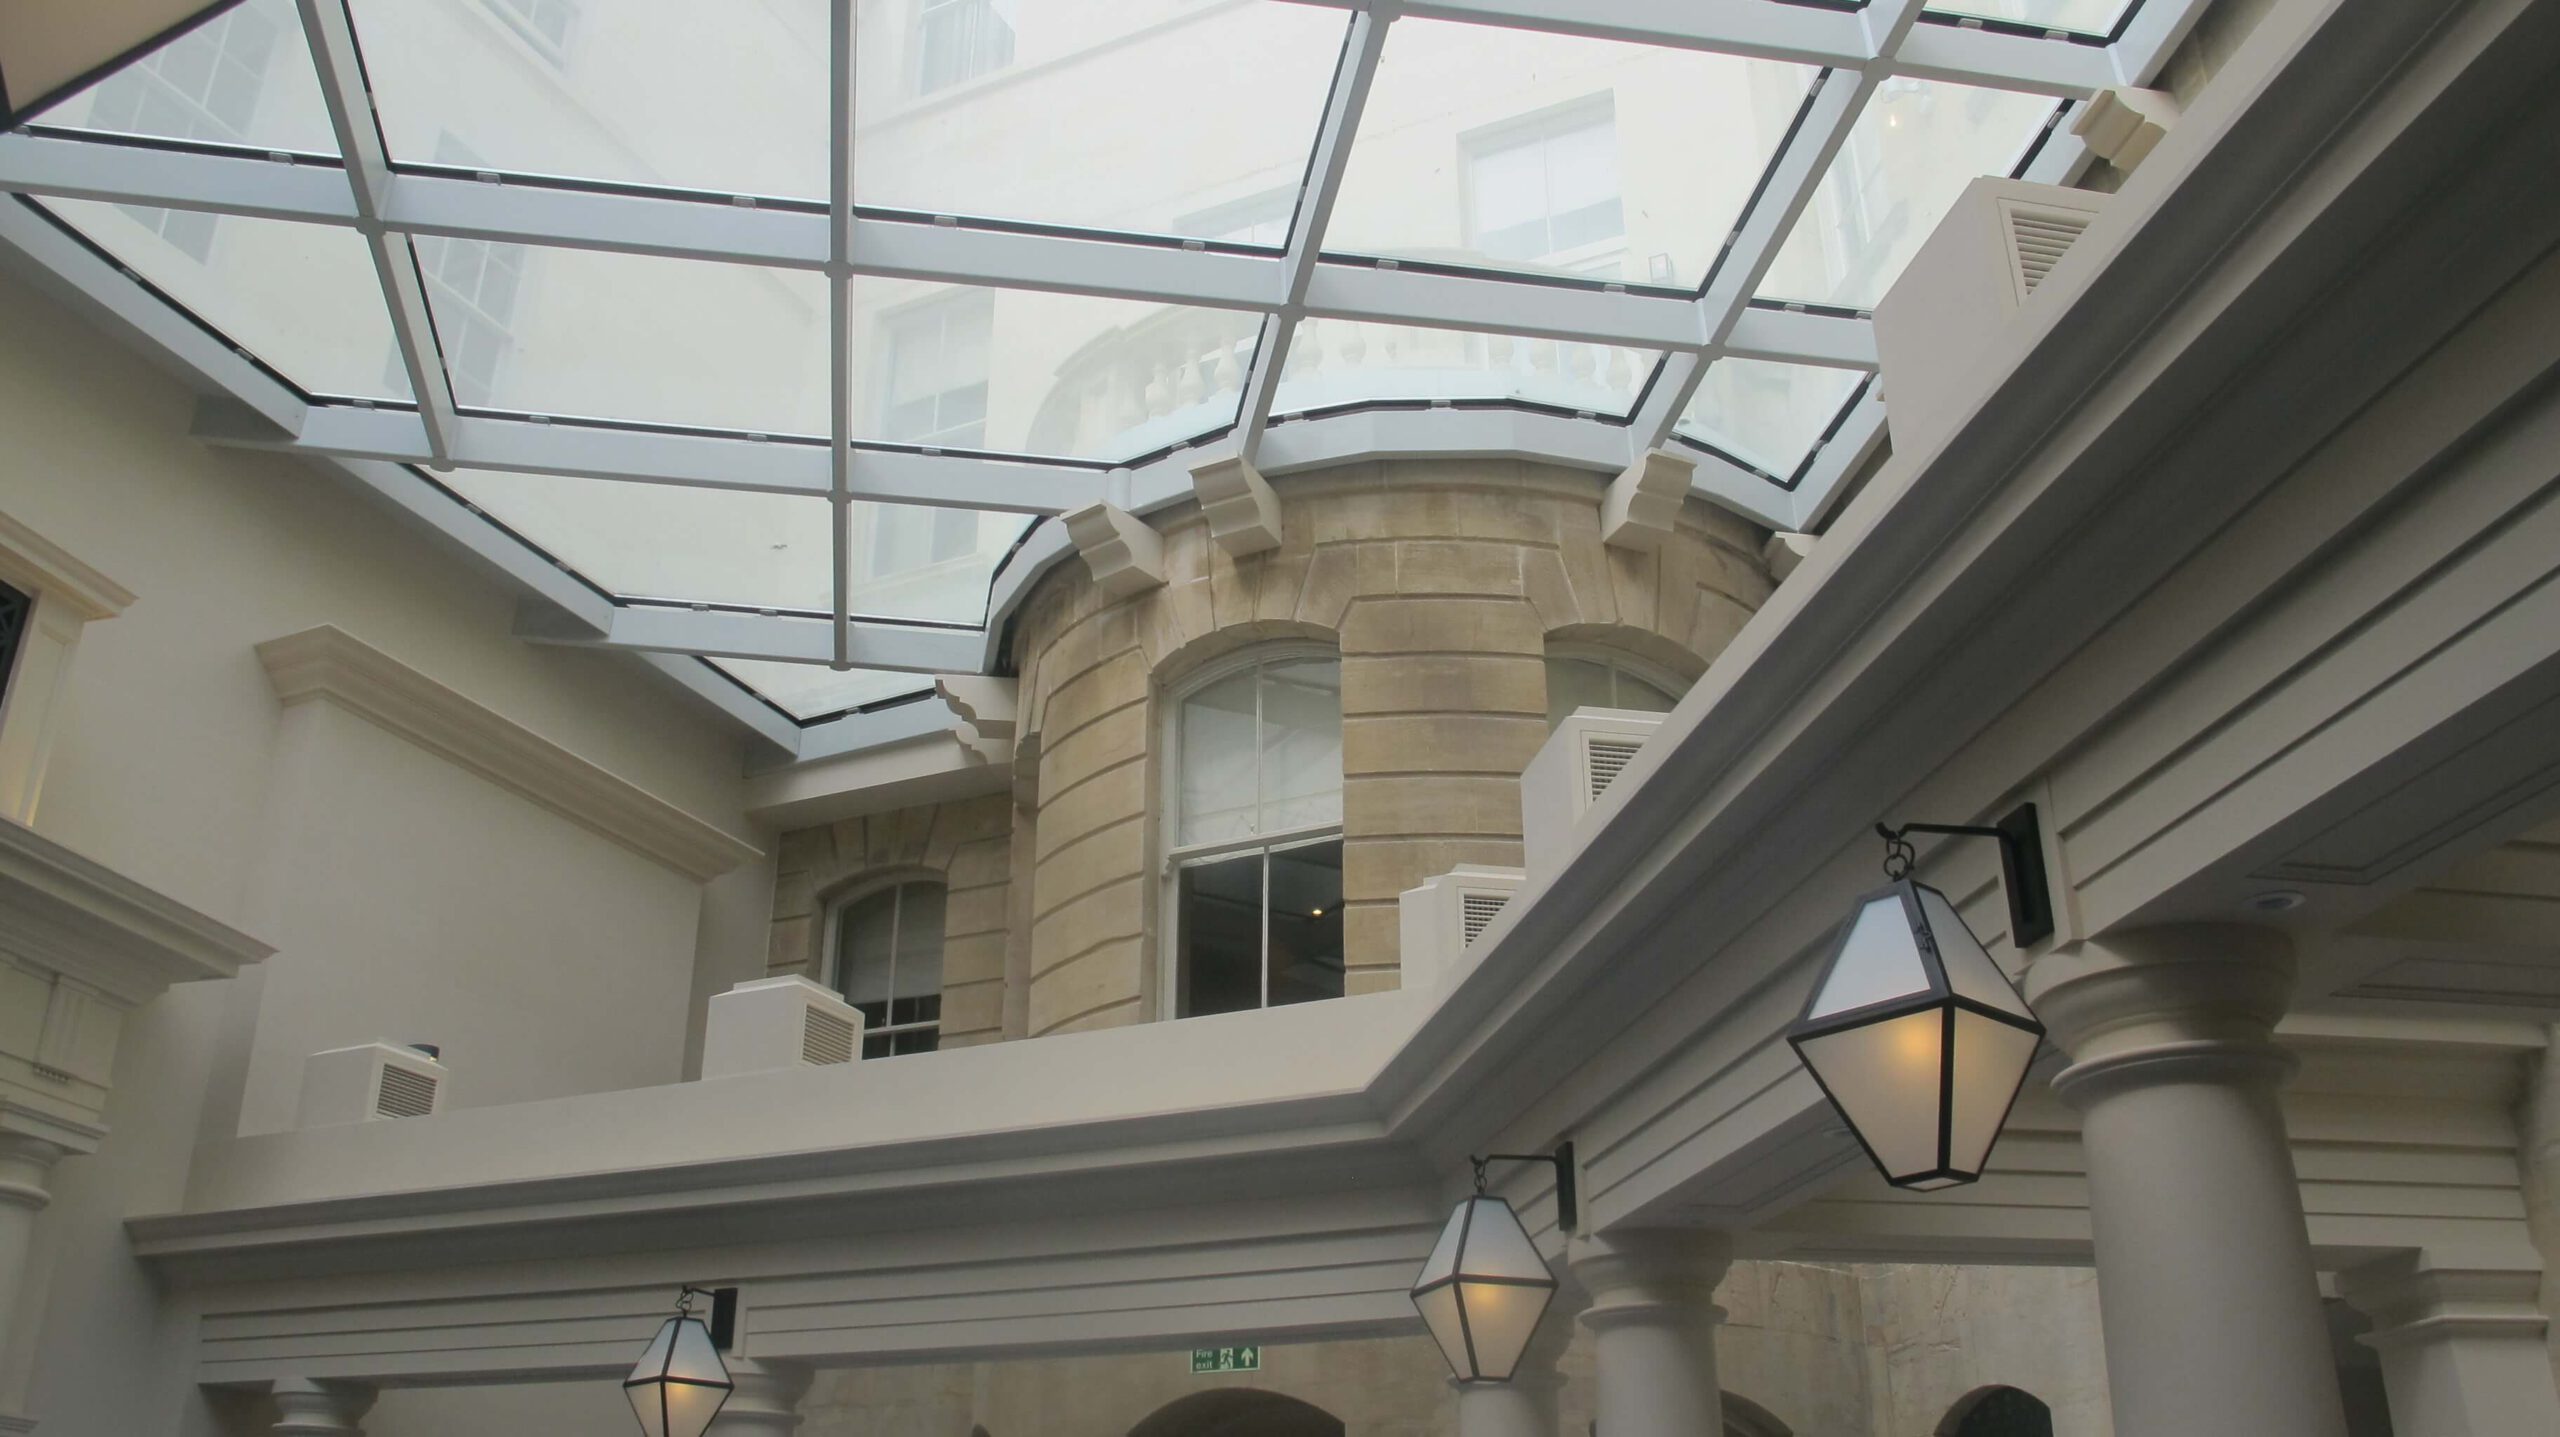 A lobby with a glass roof